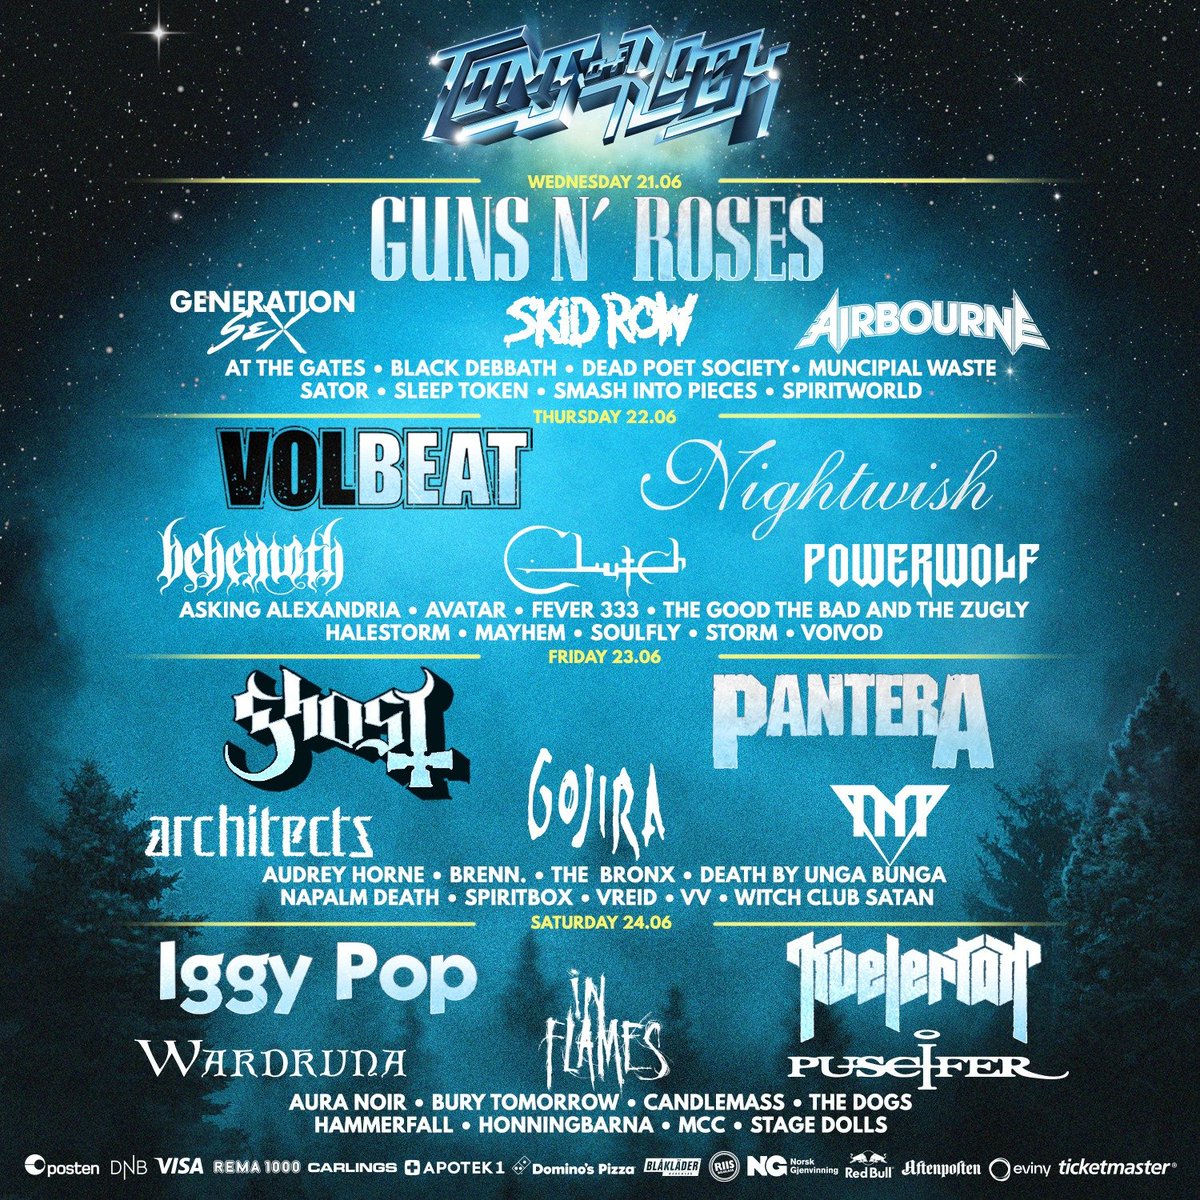 🇳🇴! See you at #TonsOfRock on 22nd June 😈 tonsofrock.no